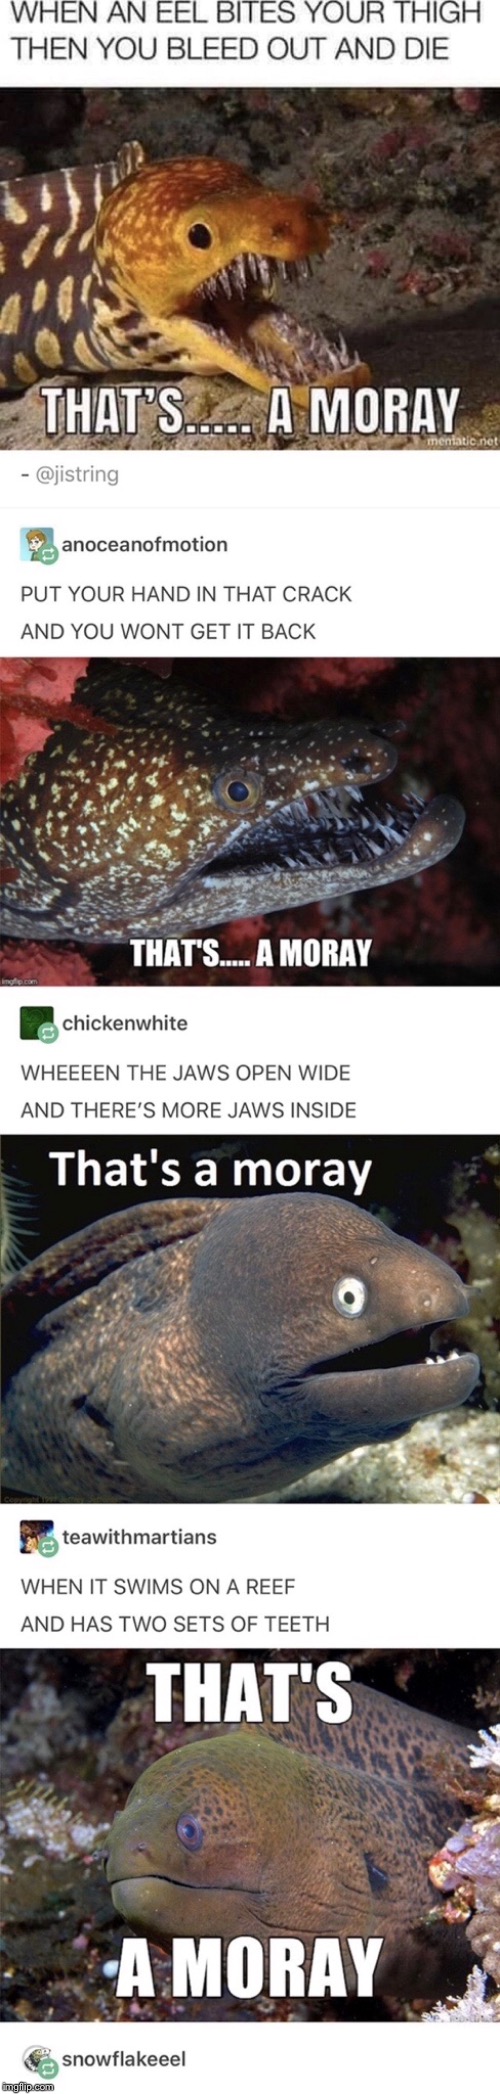 That’s a moray | made w/ Imgflip meme maker